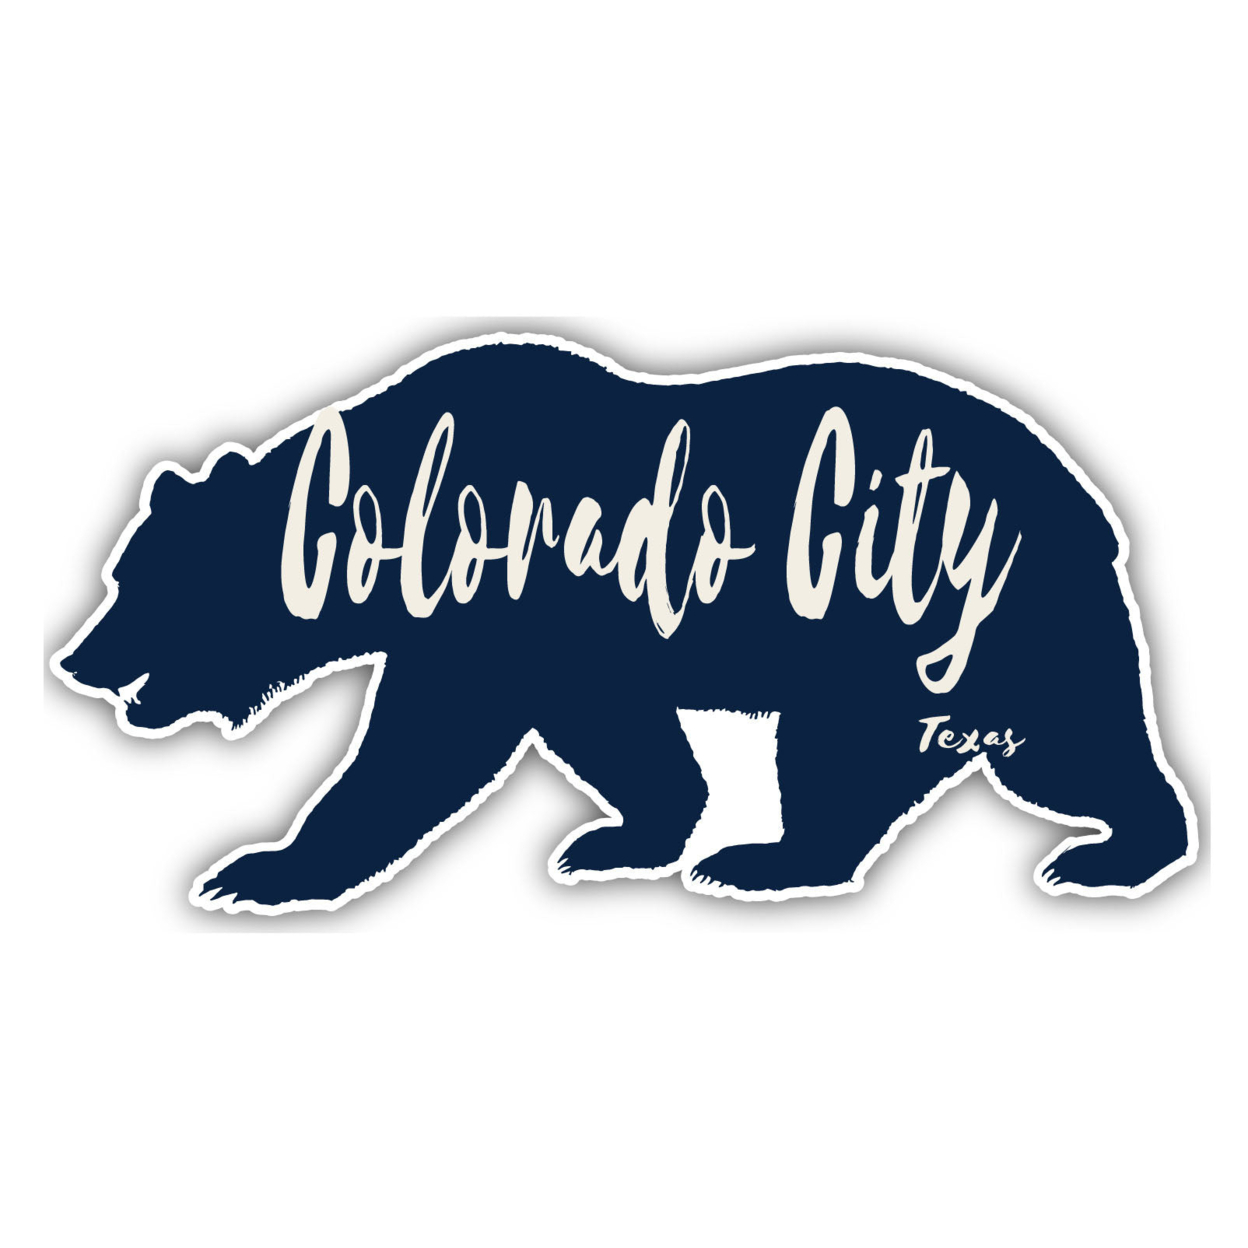 Colorado City Texas Souvenir Decorative Stickers (Choose Theme And Size) - 4-Pack, 4-Inch, Great Outdoors